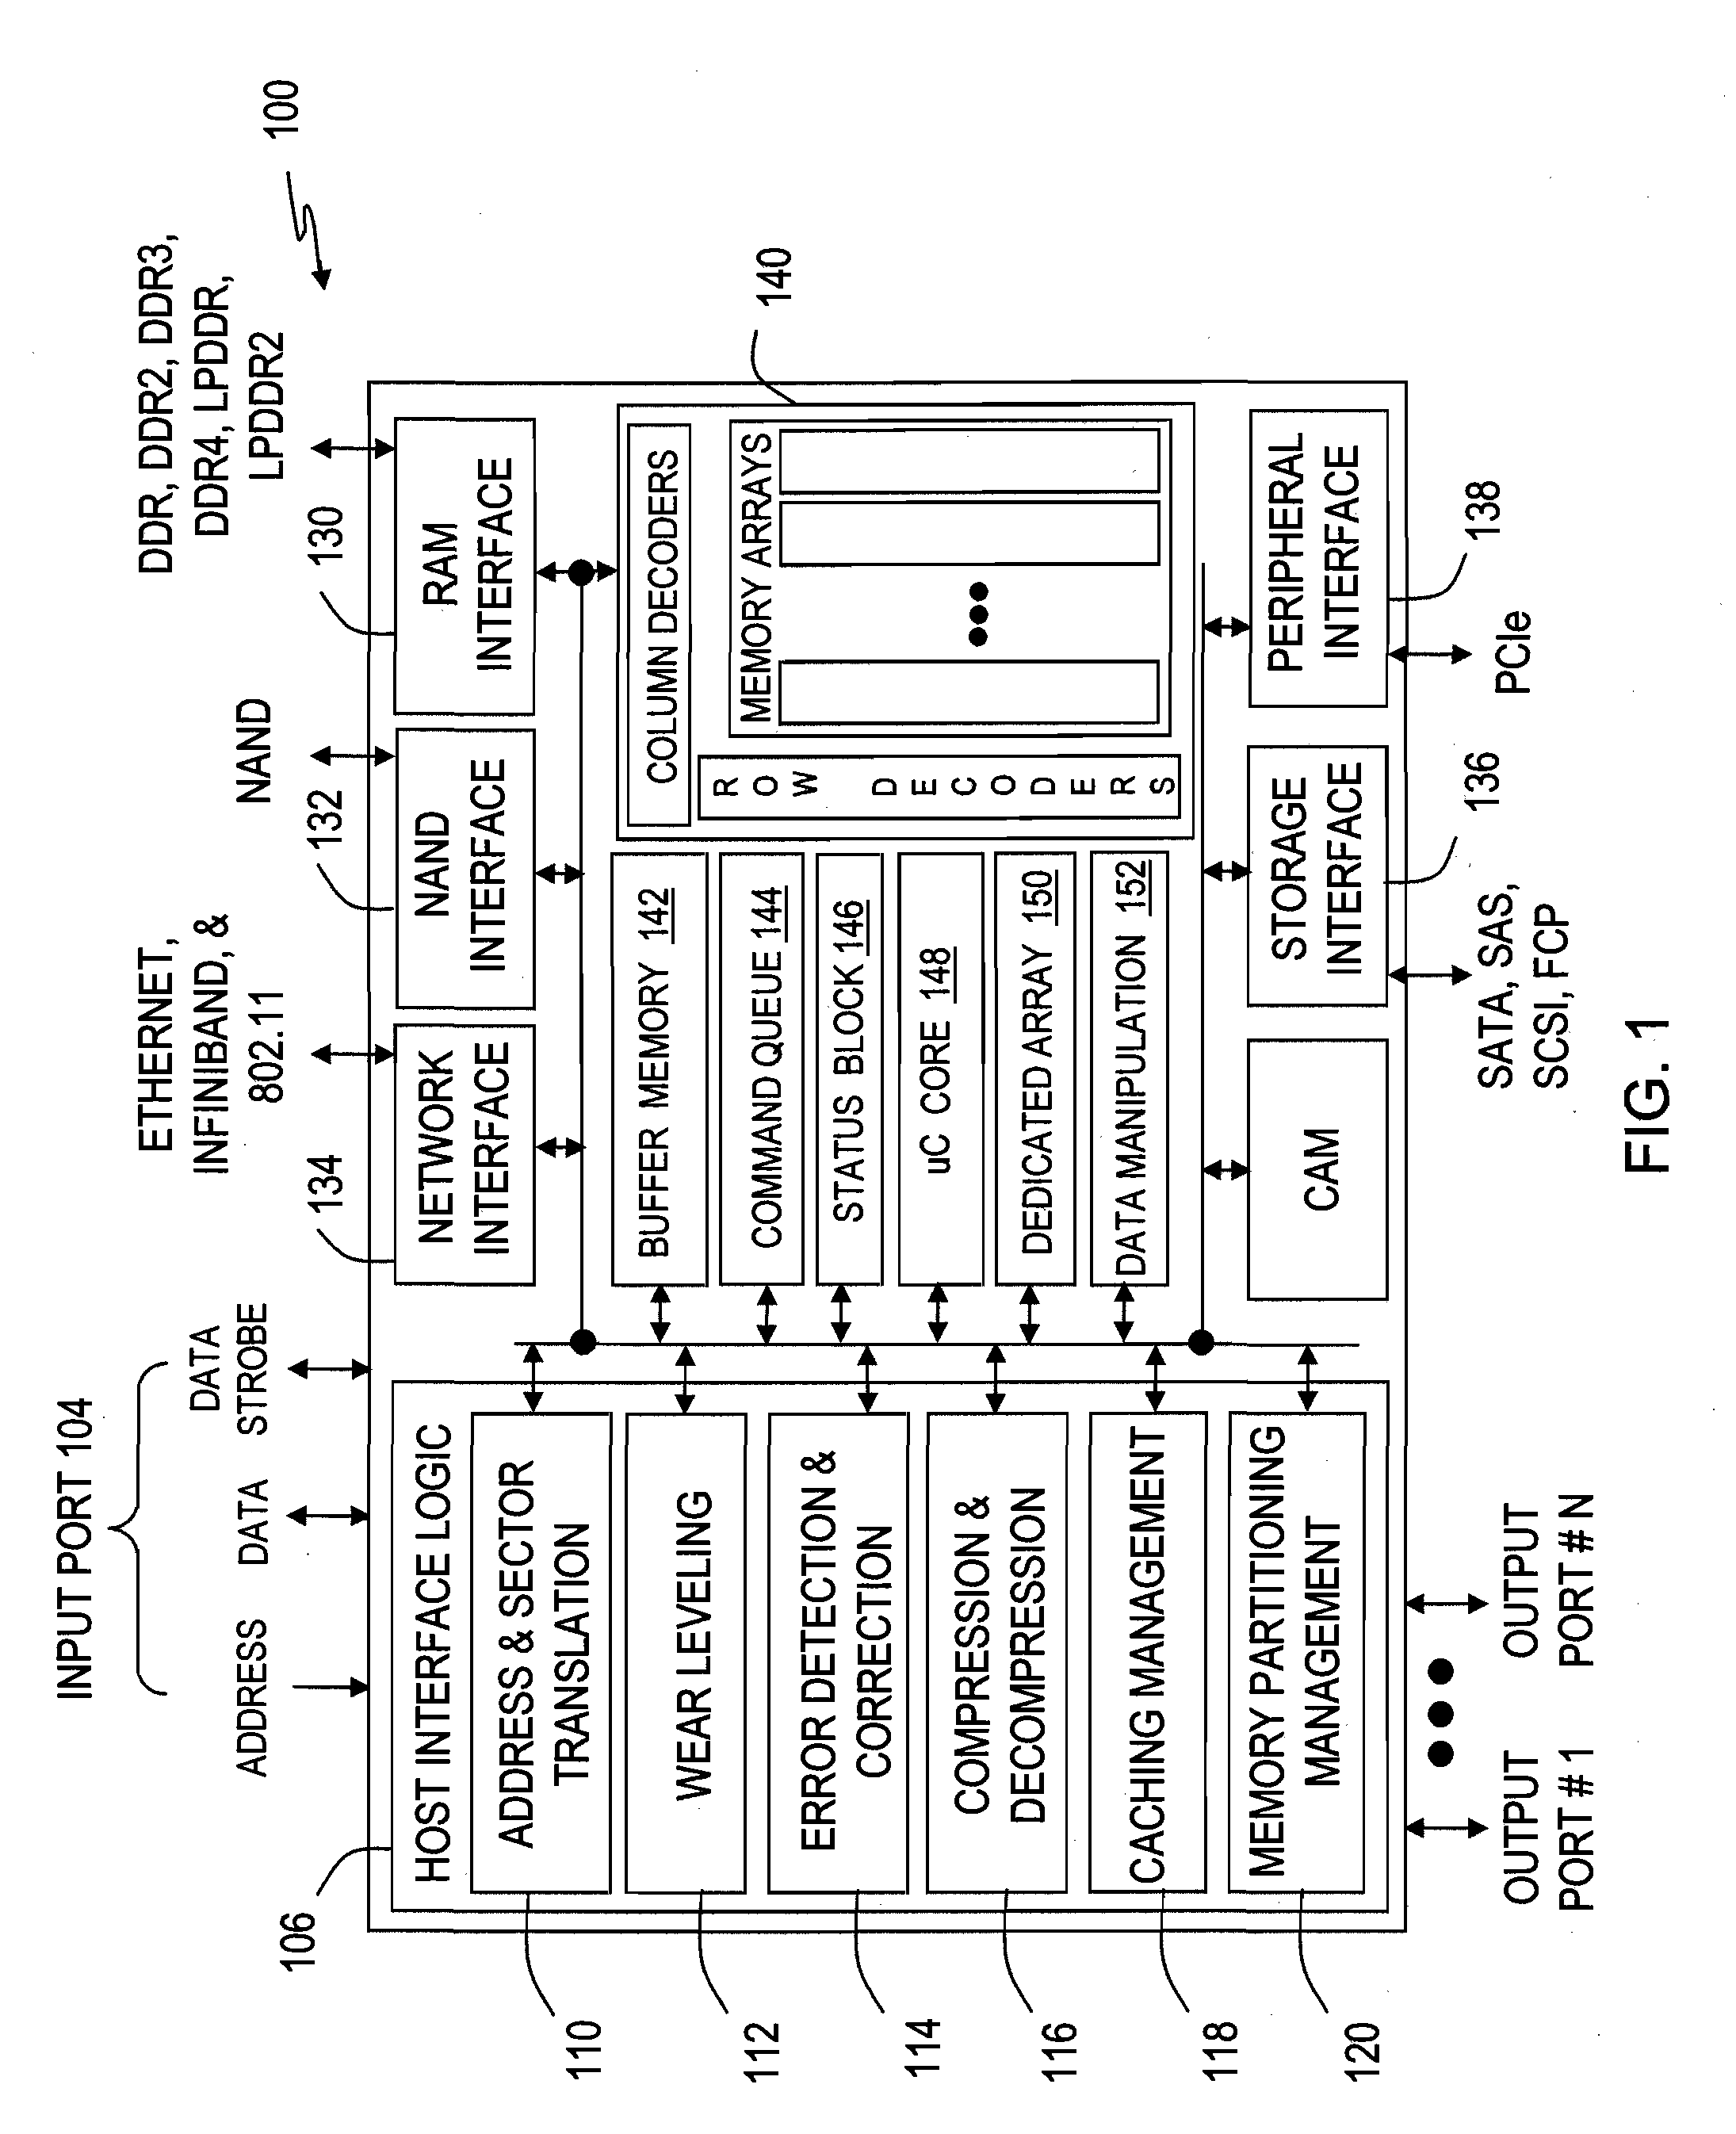 Memory device for a hierarchical memory architecture